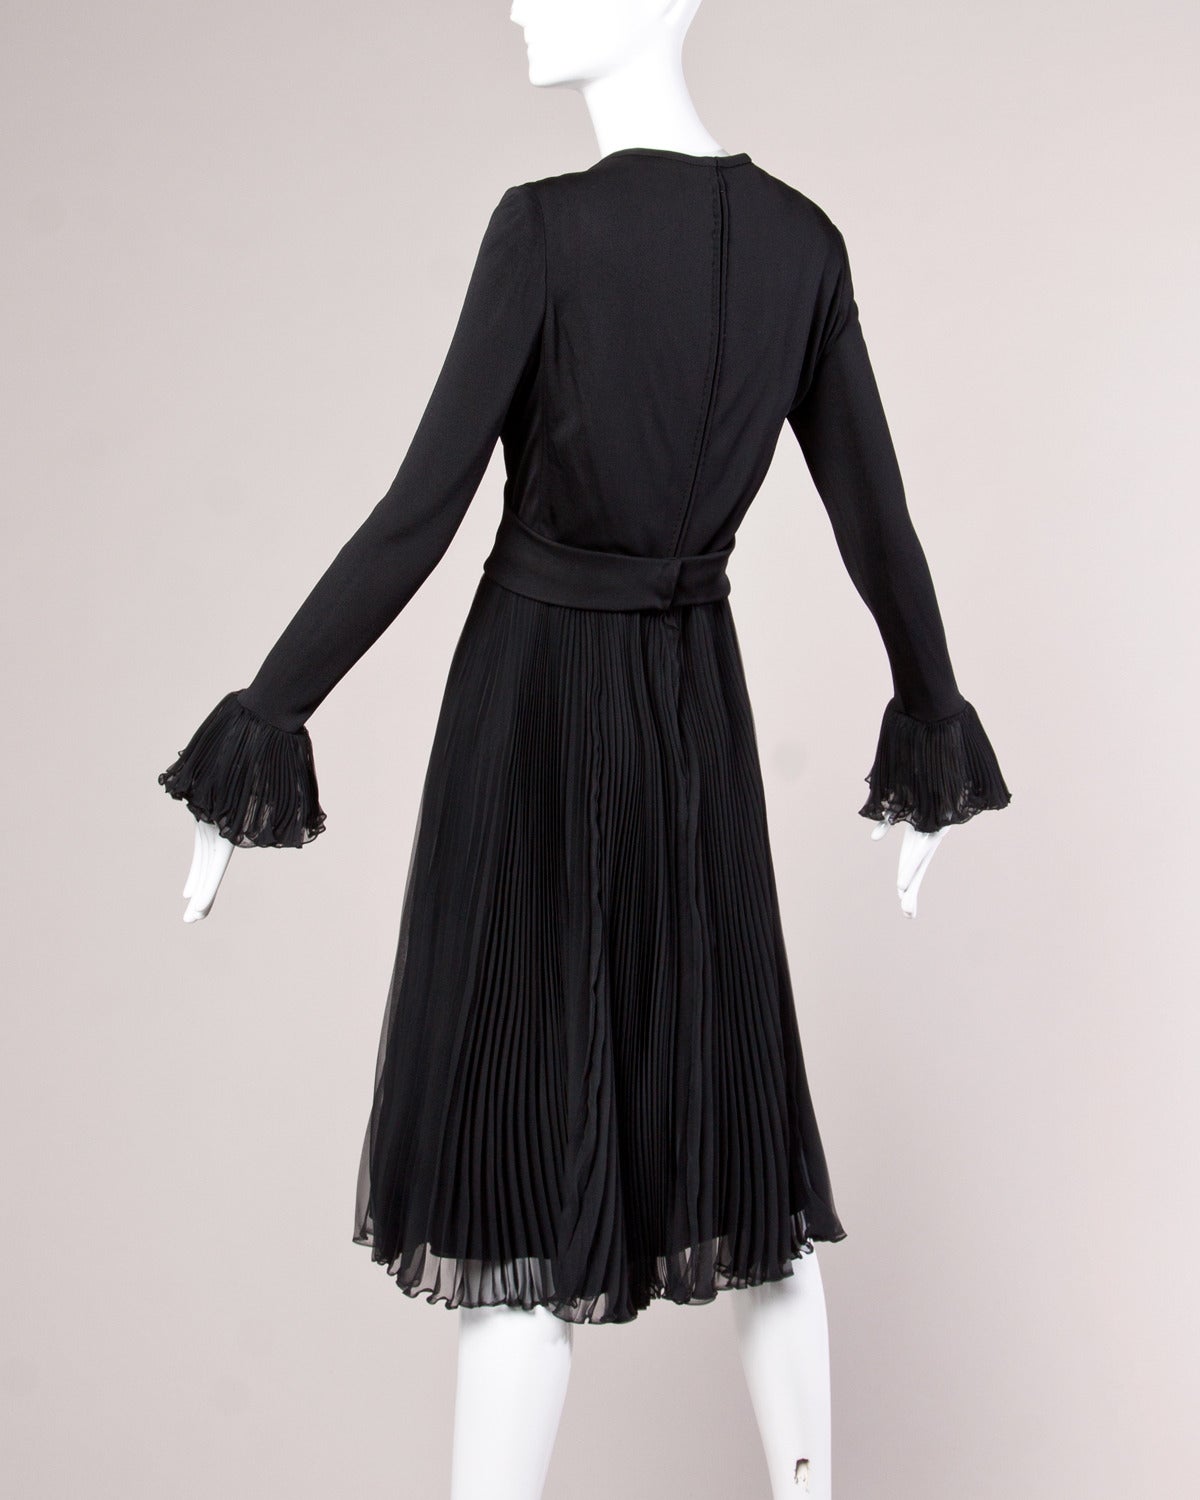 Gorgeous high end couture dress dated August 12, 1970 by Ric McClintock. Bodice is made up of what feels like silk jersey. Sheer accordion pleated skirt and sleeve cuffs. Heavy weight circular rhinestone belt buckle detail. A rare and hard-to-find